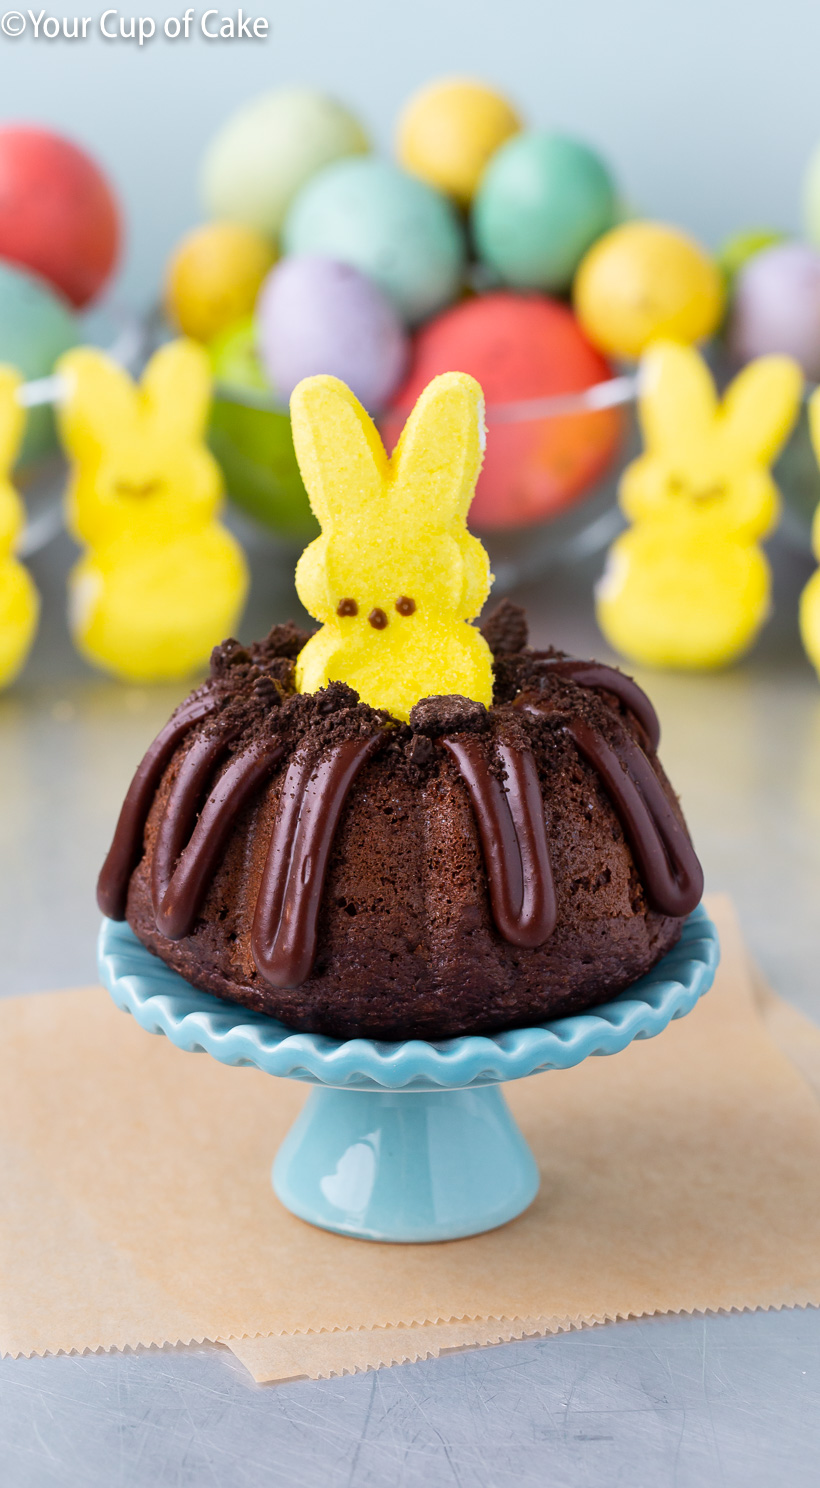 Cute Bunny Bundt Cakes for Easter! LOVE this recipe idea!